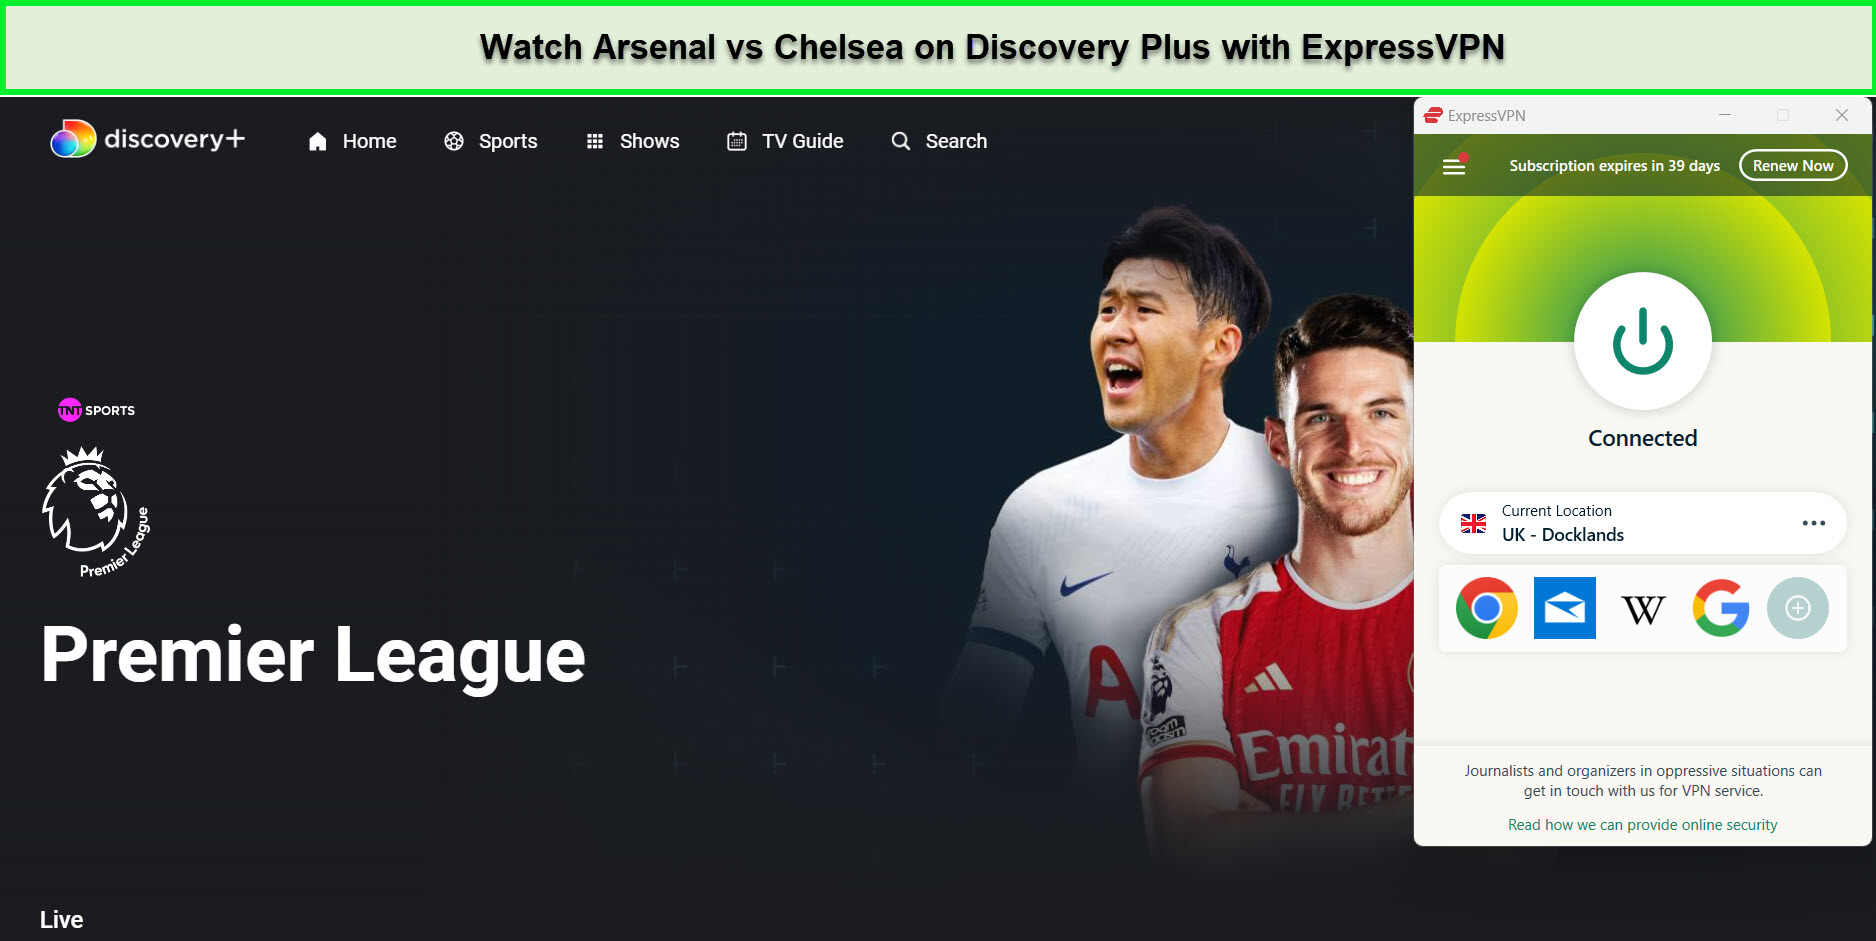 Watch-Arsenal-vs-Chelsea-in-Spain-on-Discovery-Plus-with-ExpressVPN